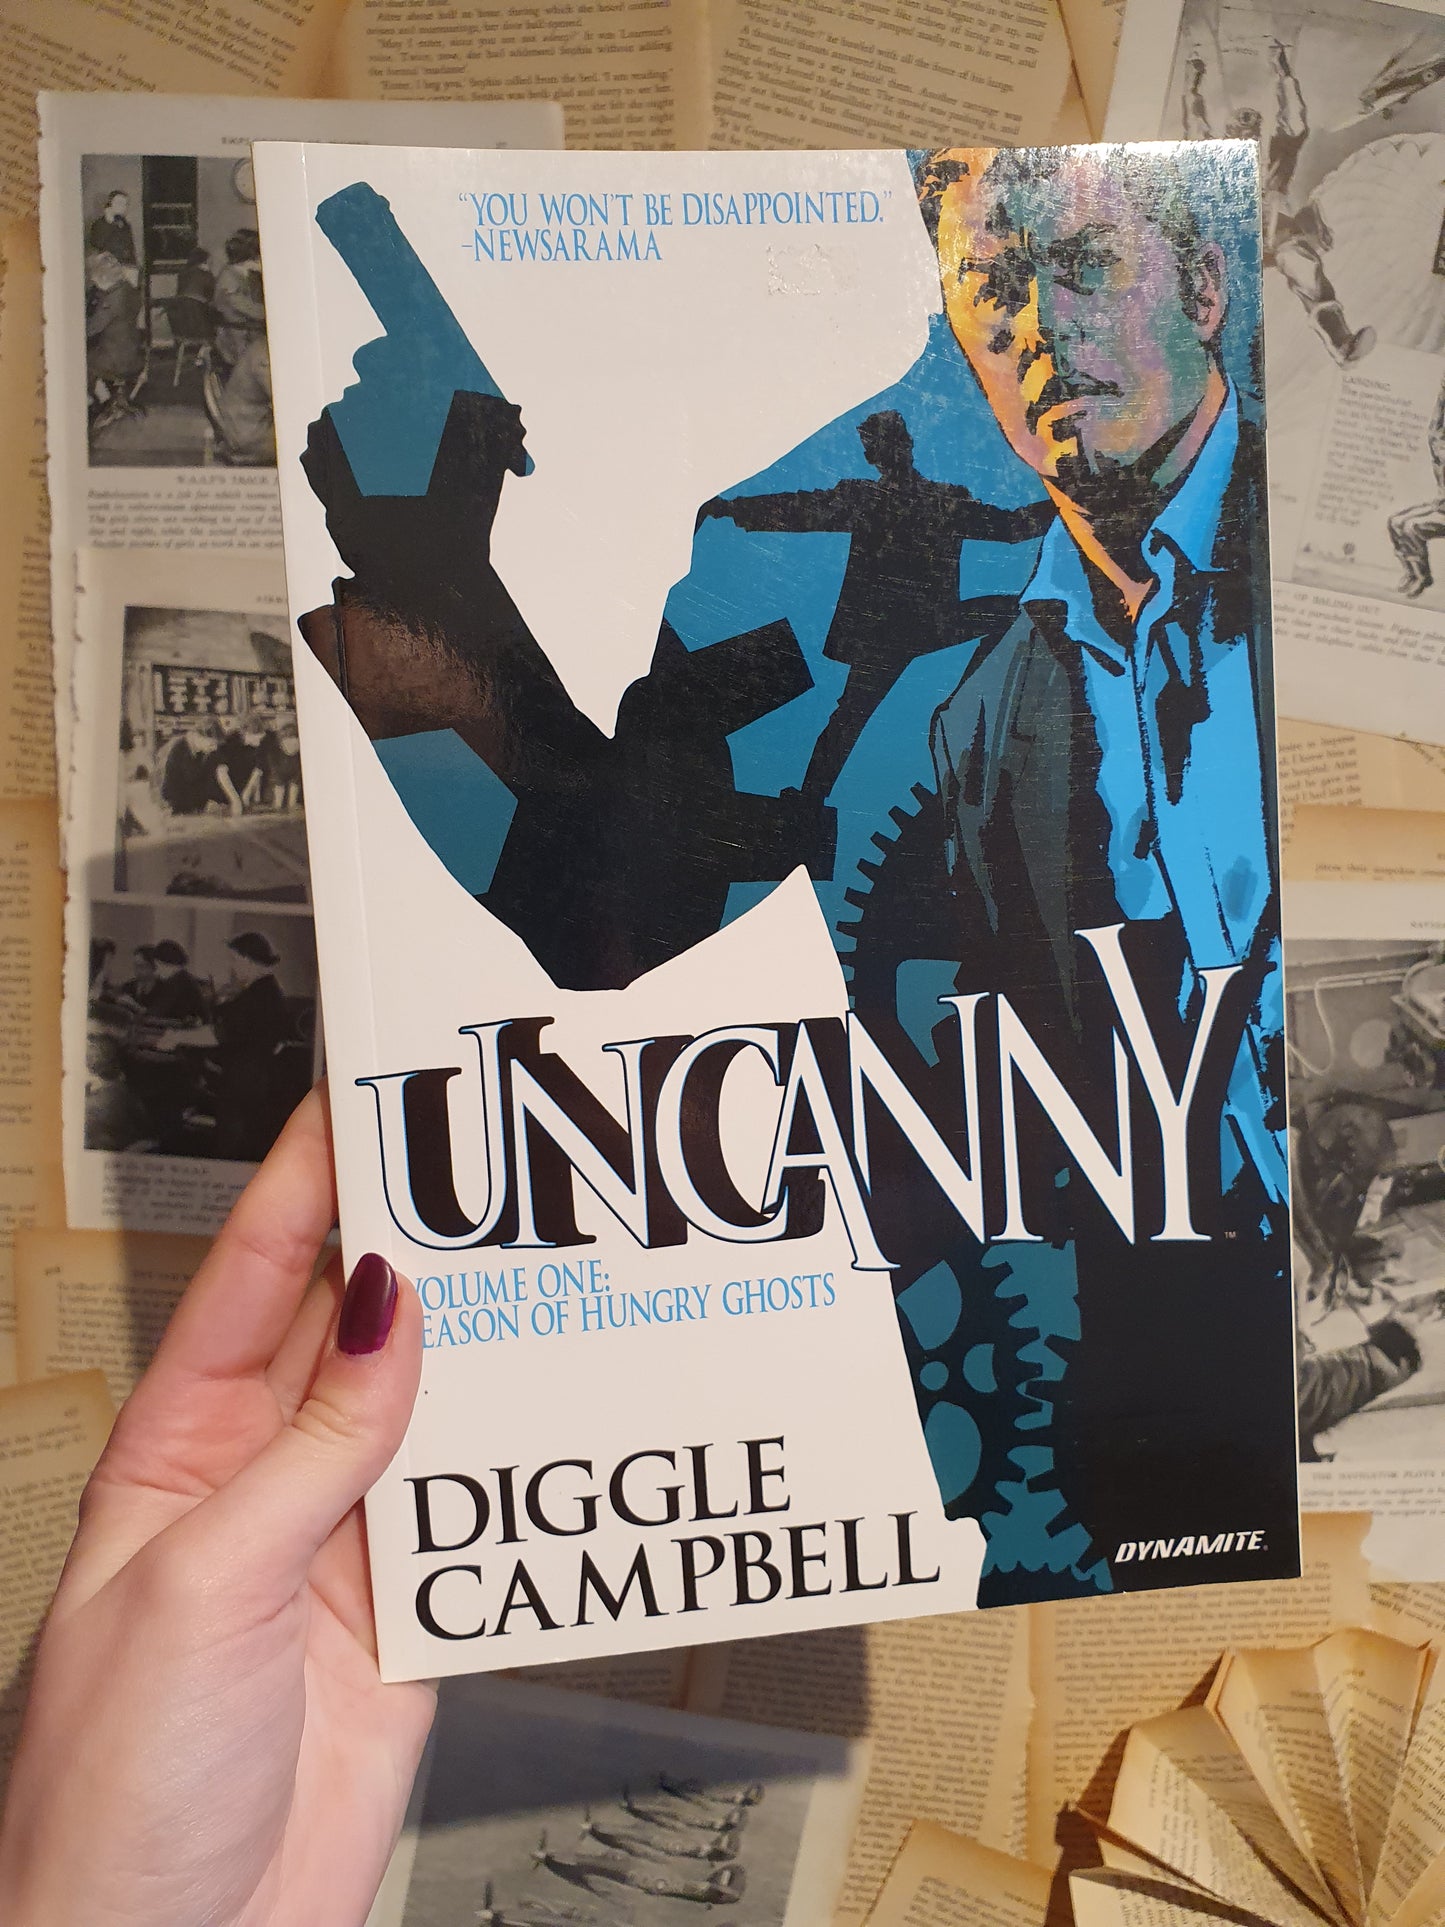 Uncanny Vol 1: Season of Hungry Ghosts by Diggle & Campbell (2014)